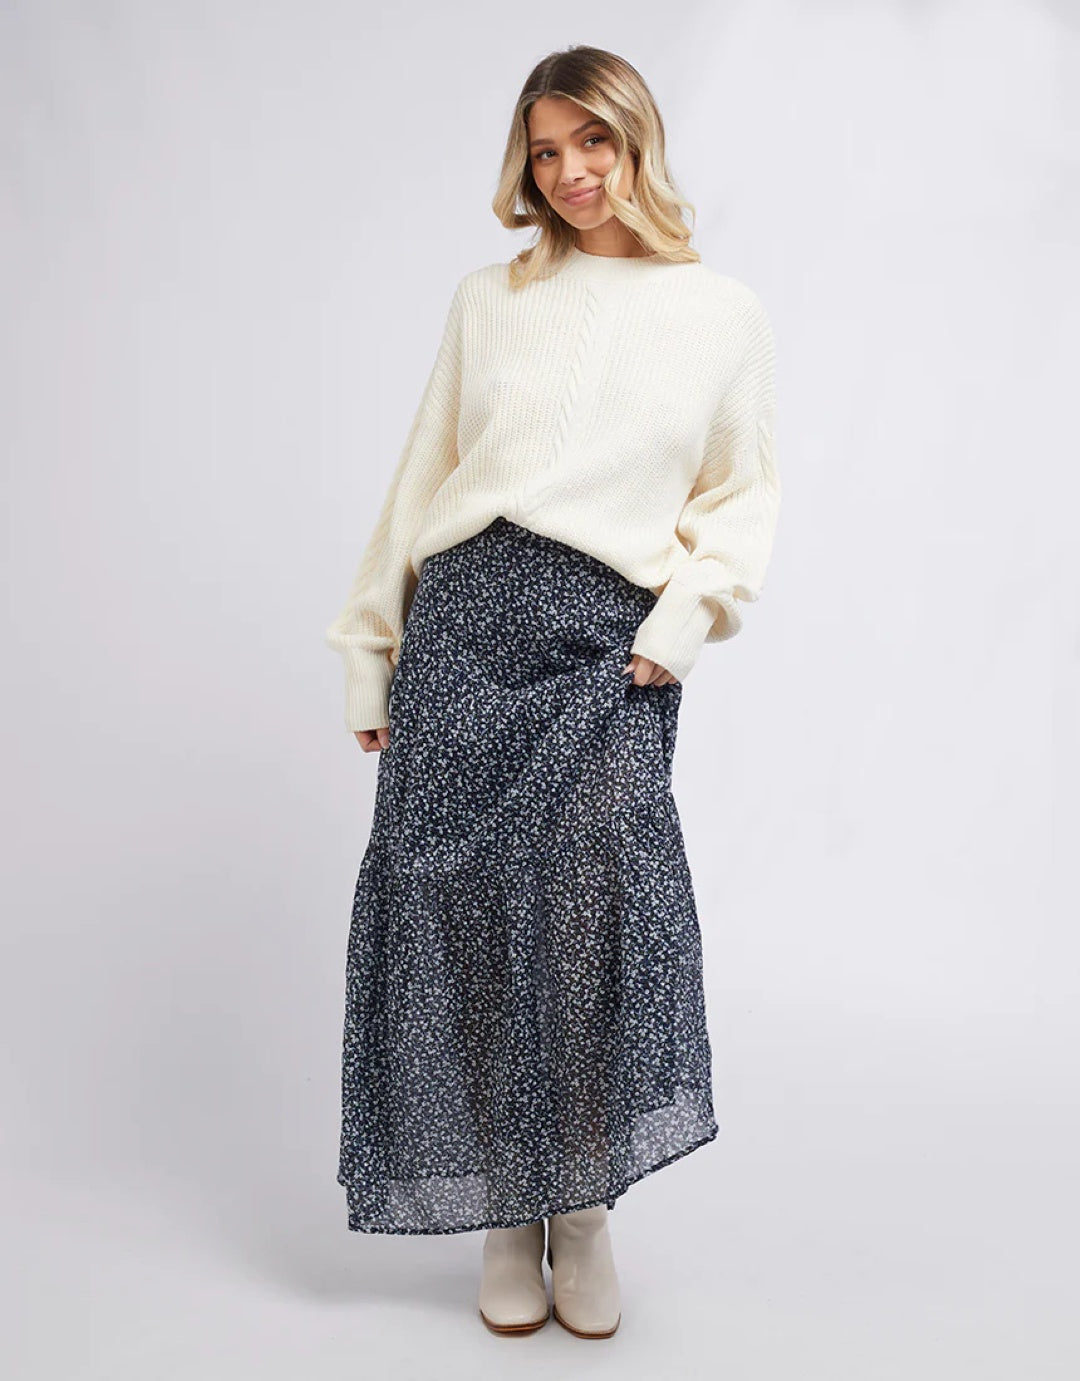 Lulu Floral Maxi Skirt from All About Eve